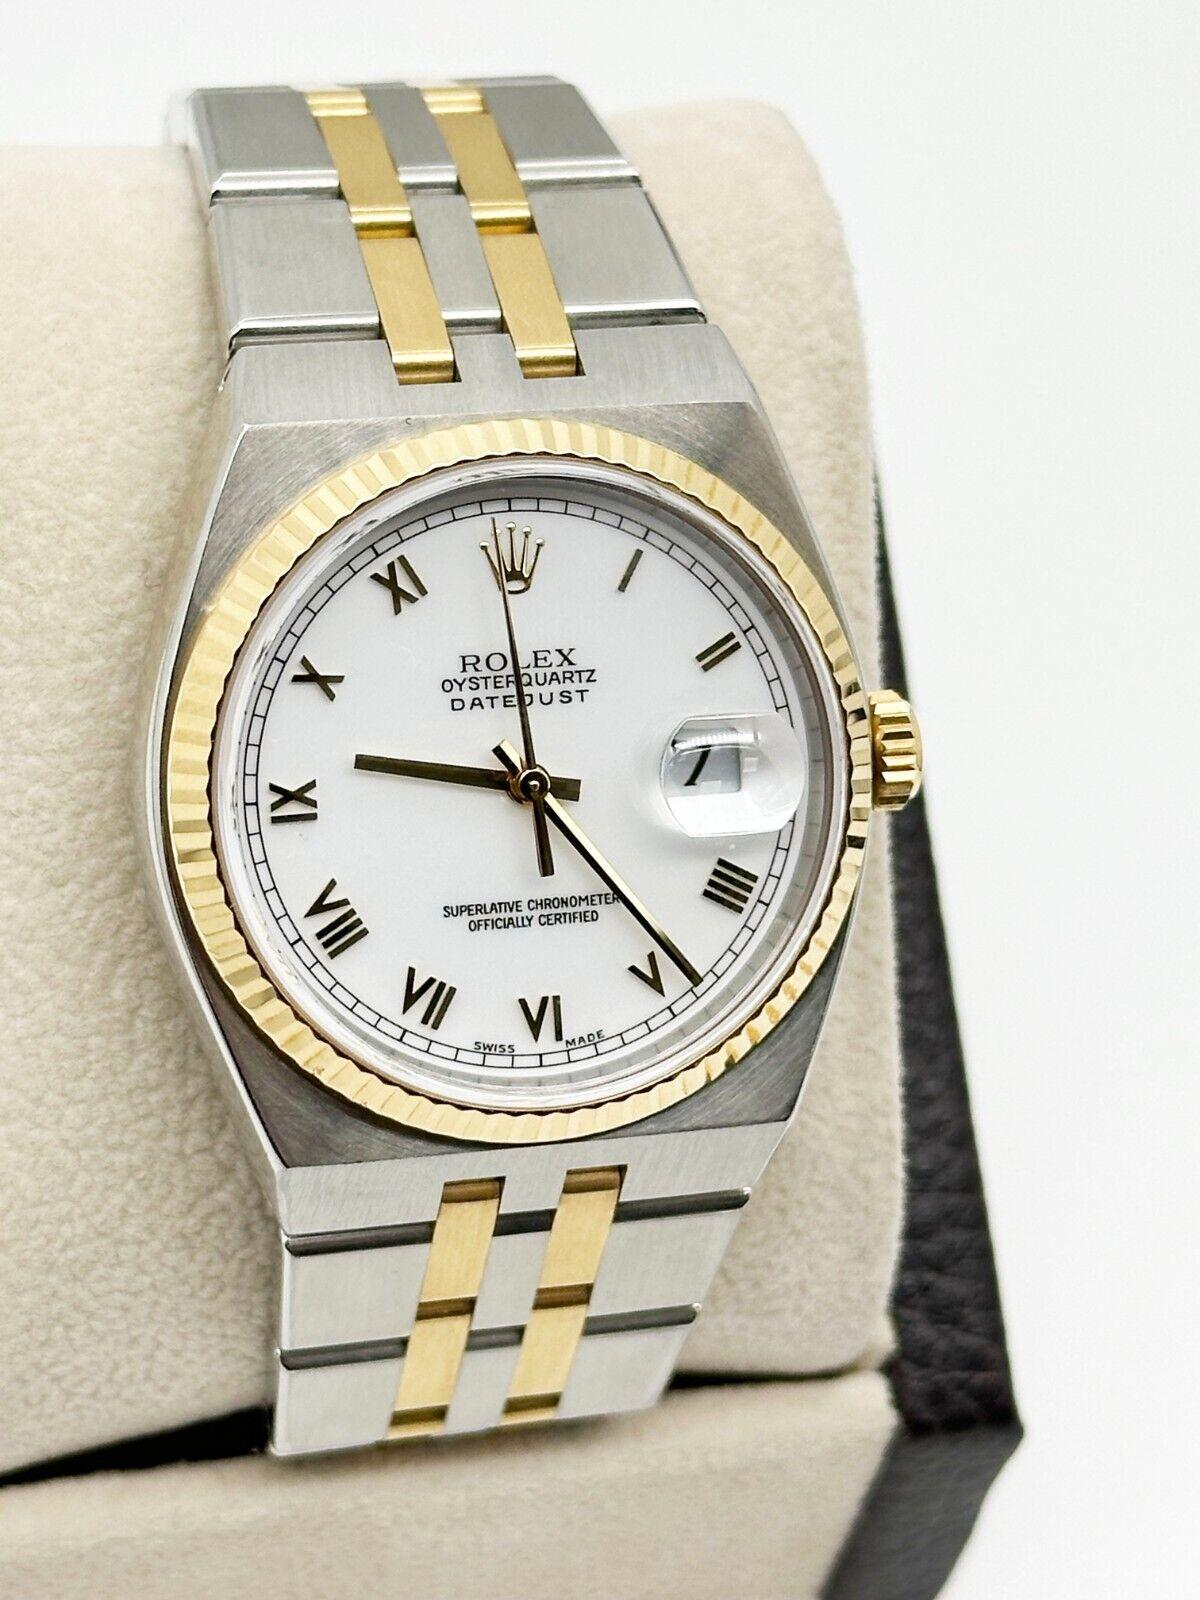 Rolex 17013 Datejust Oysterquartz White Dial 18K Yellow Gold Stainless Steel 3